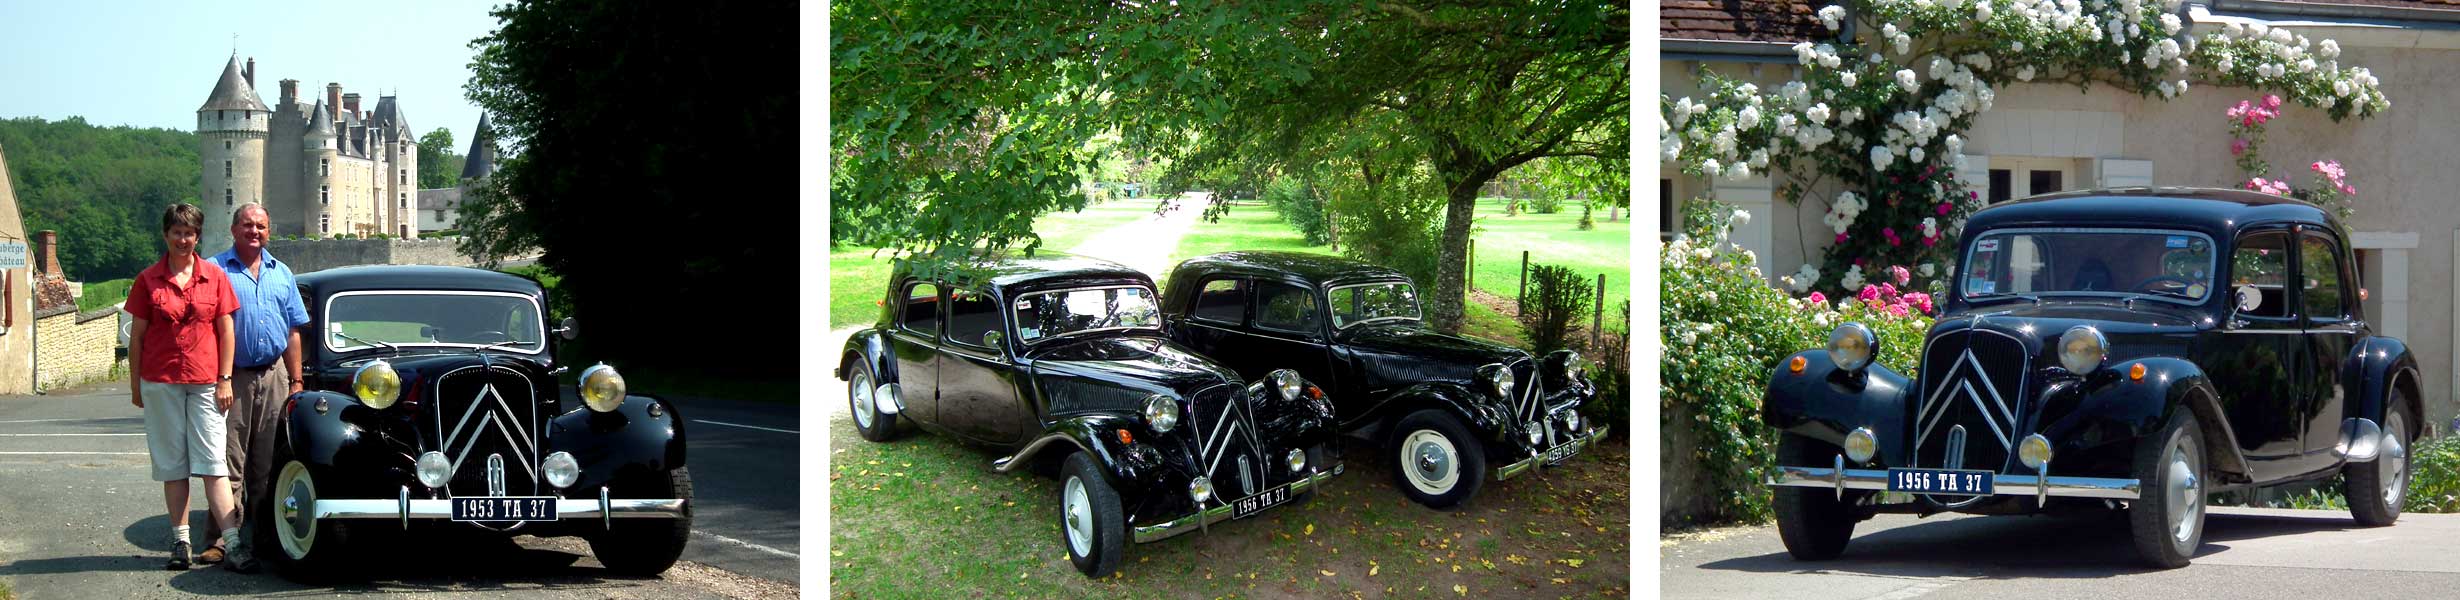 The Citroen Traction avant cars of Loire Valley Time Travel